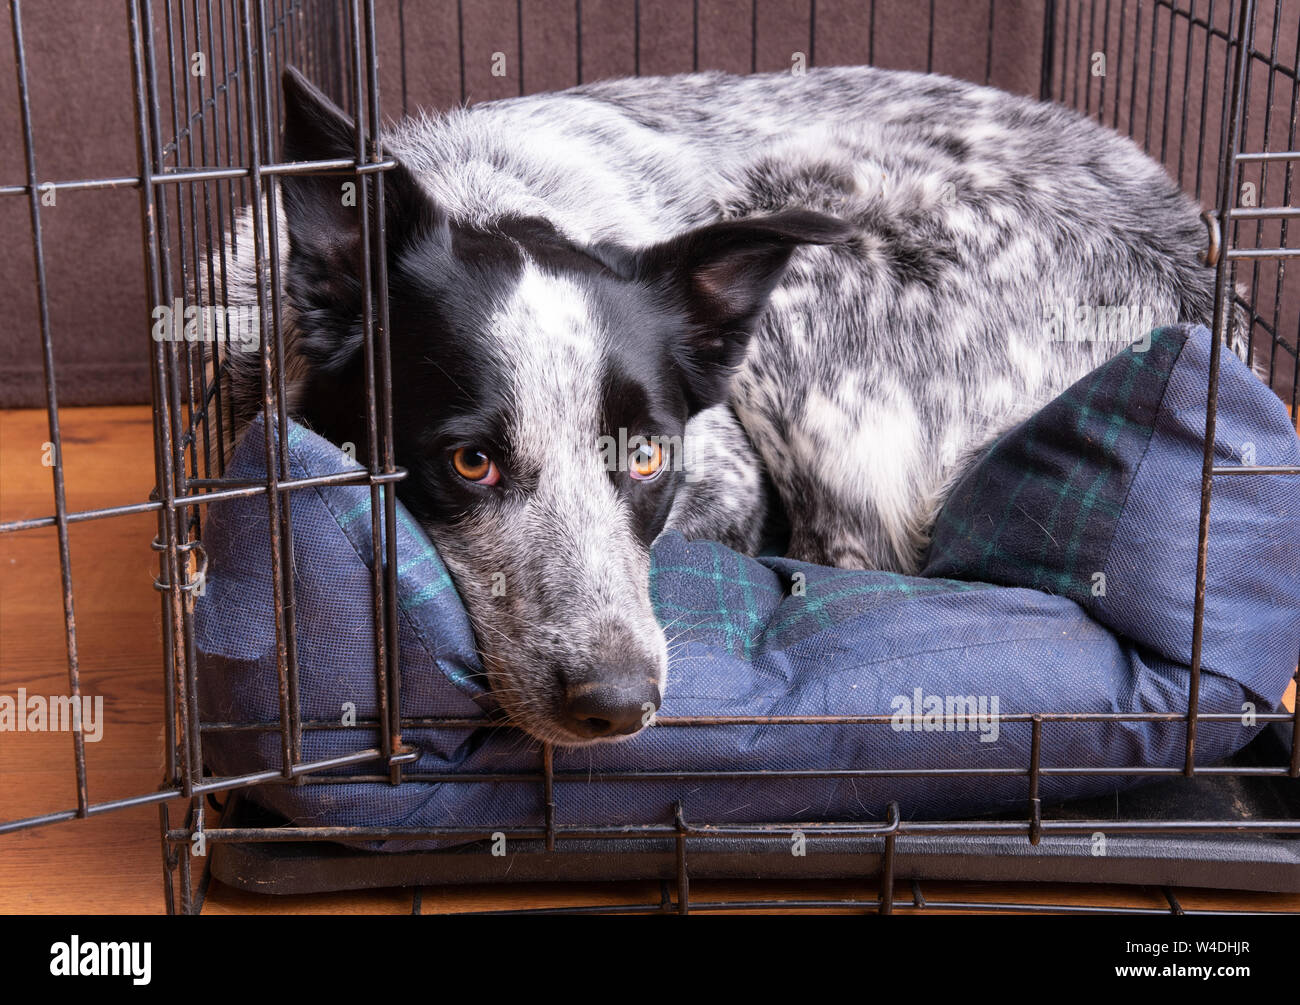 Dog resting in her crate, with door open so she can come and go as she pleases Stock Photo